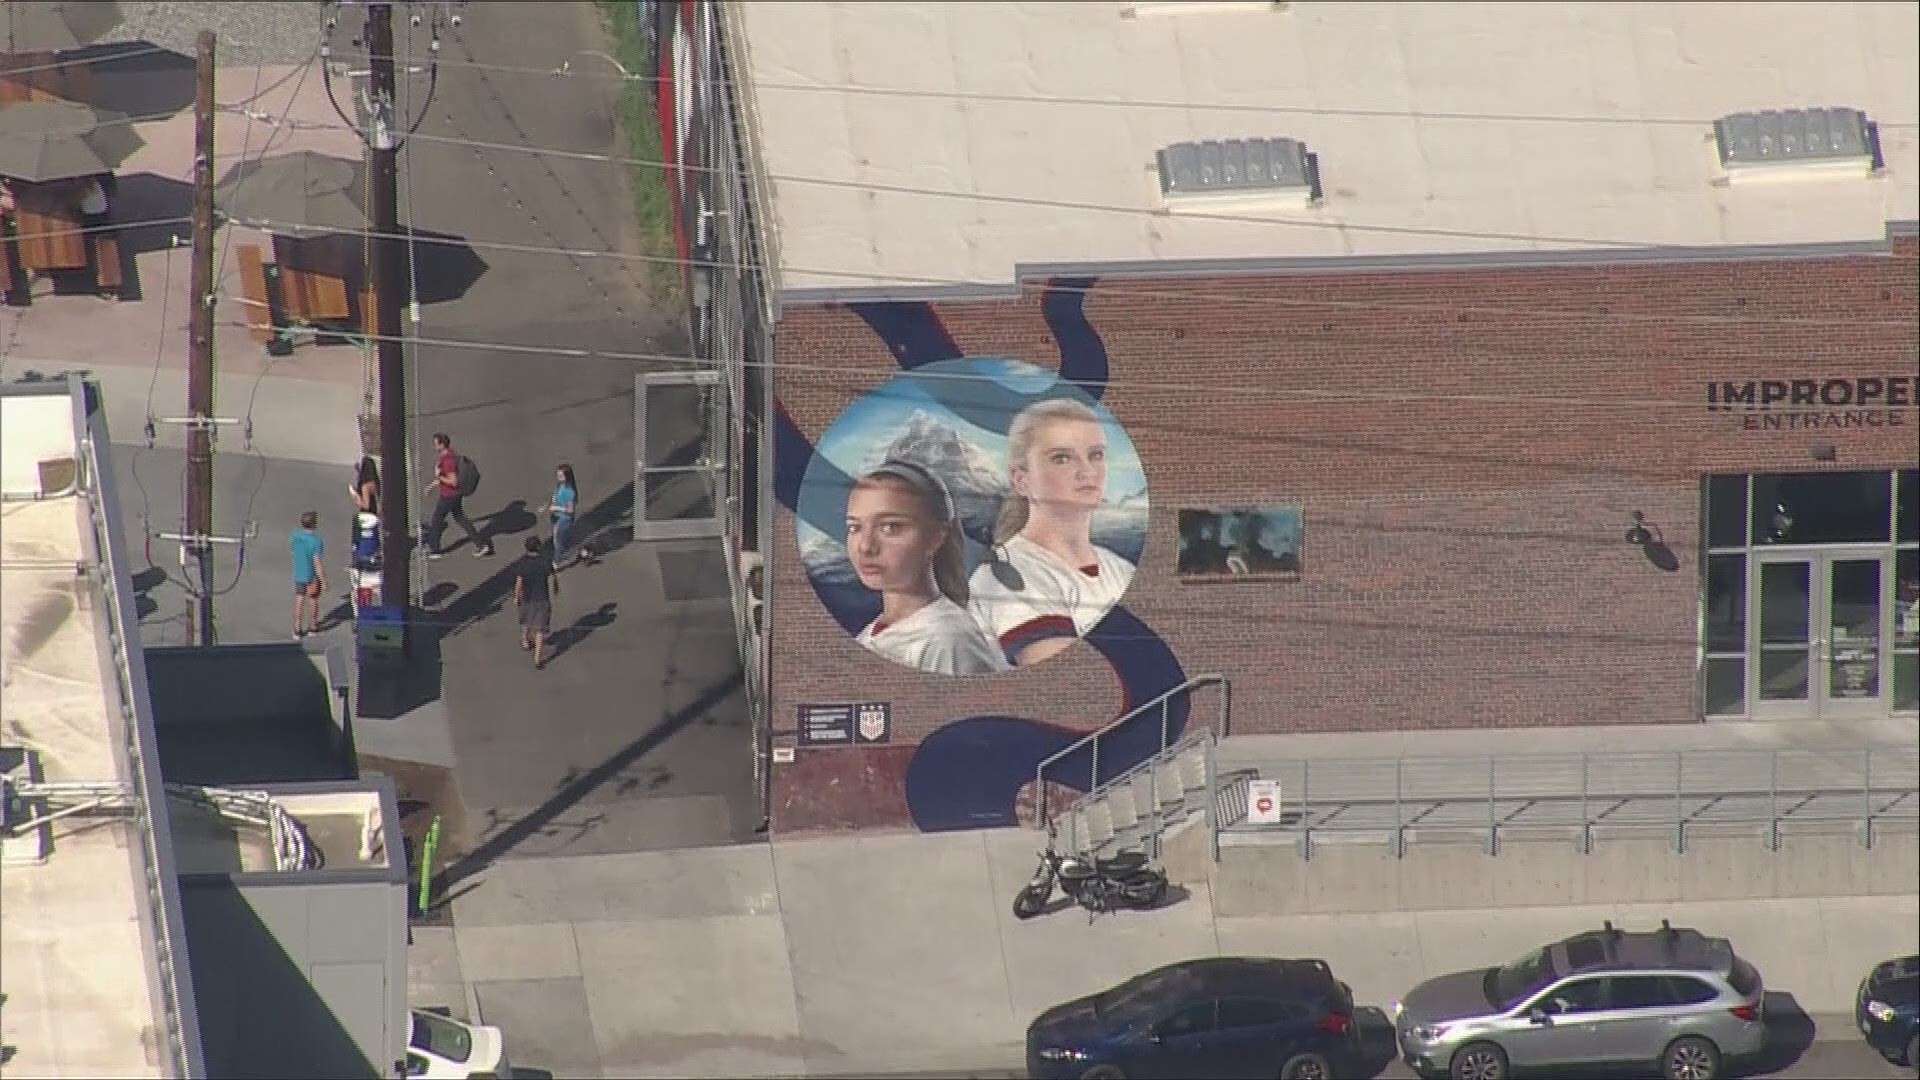 You can see Colorado natives Mallory Pugh and Lindsey Horan enshrined on the side of Improper City in Denver's RiNo district.